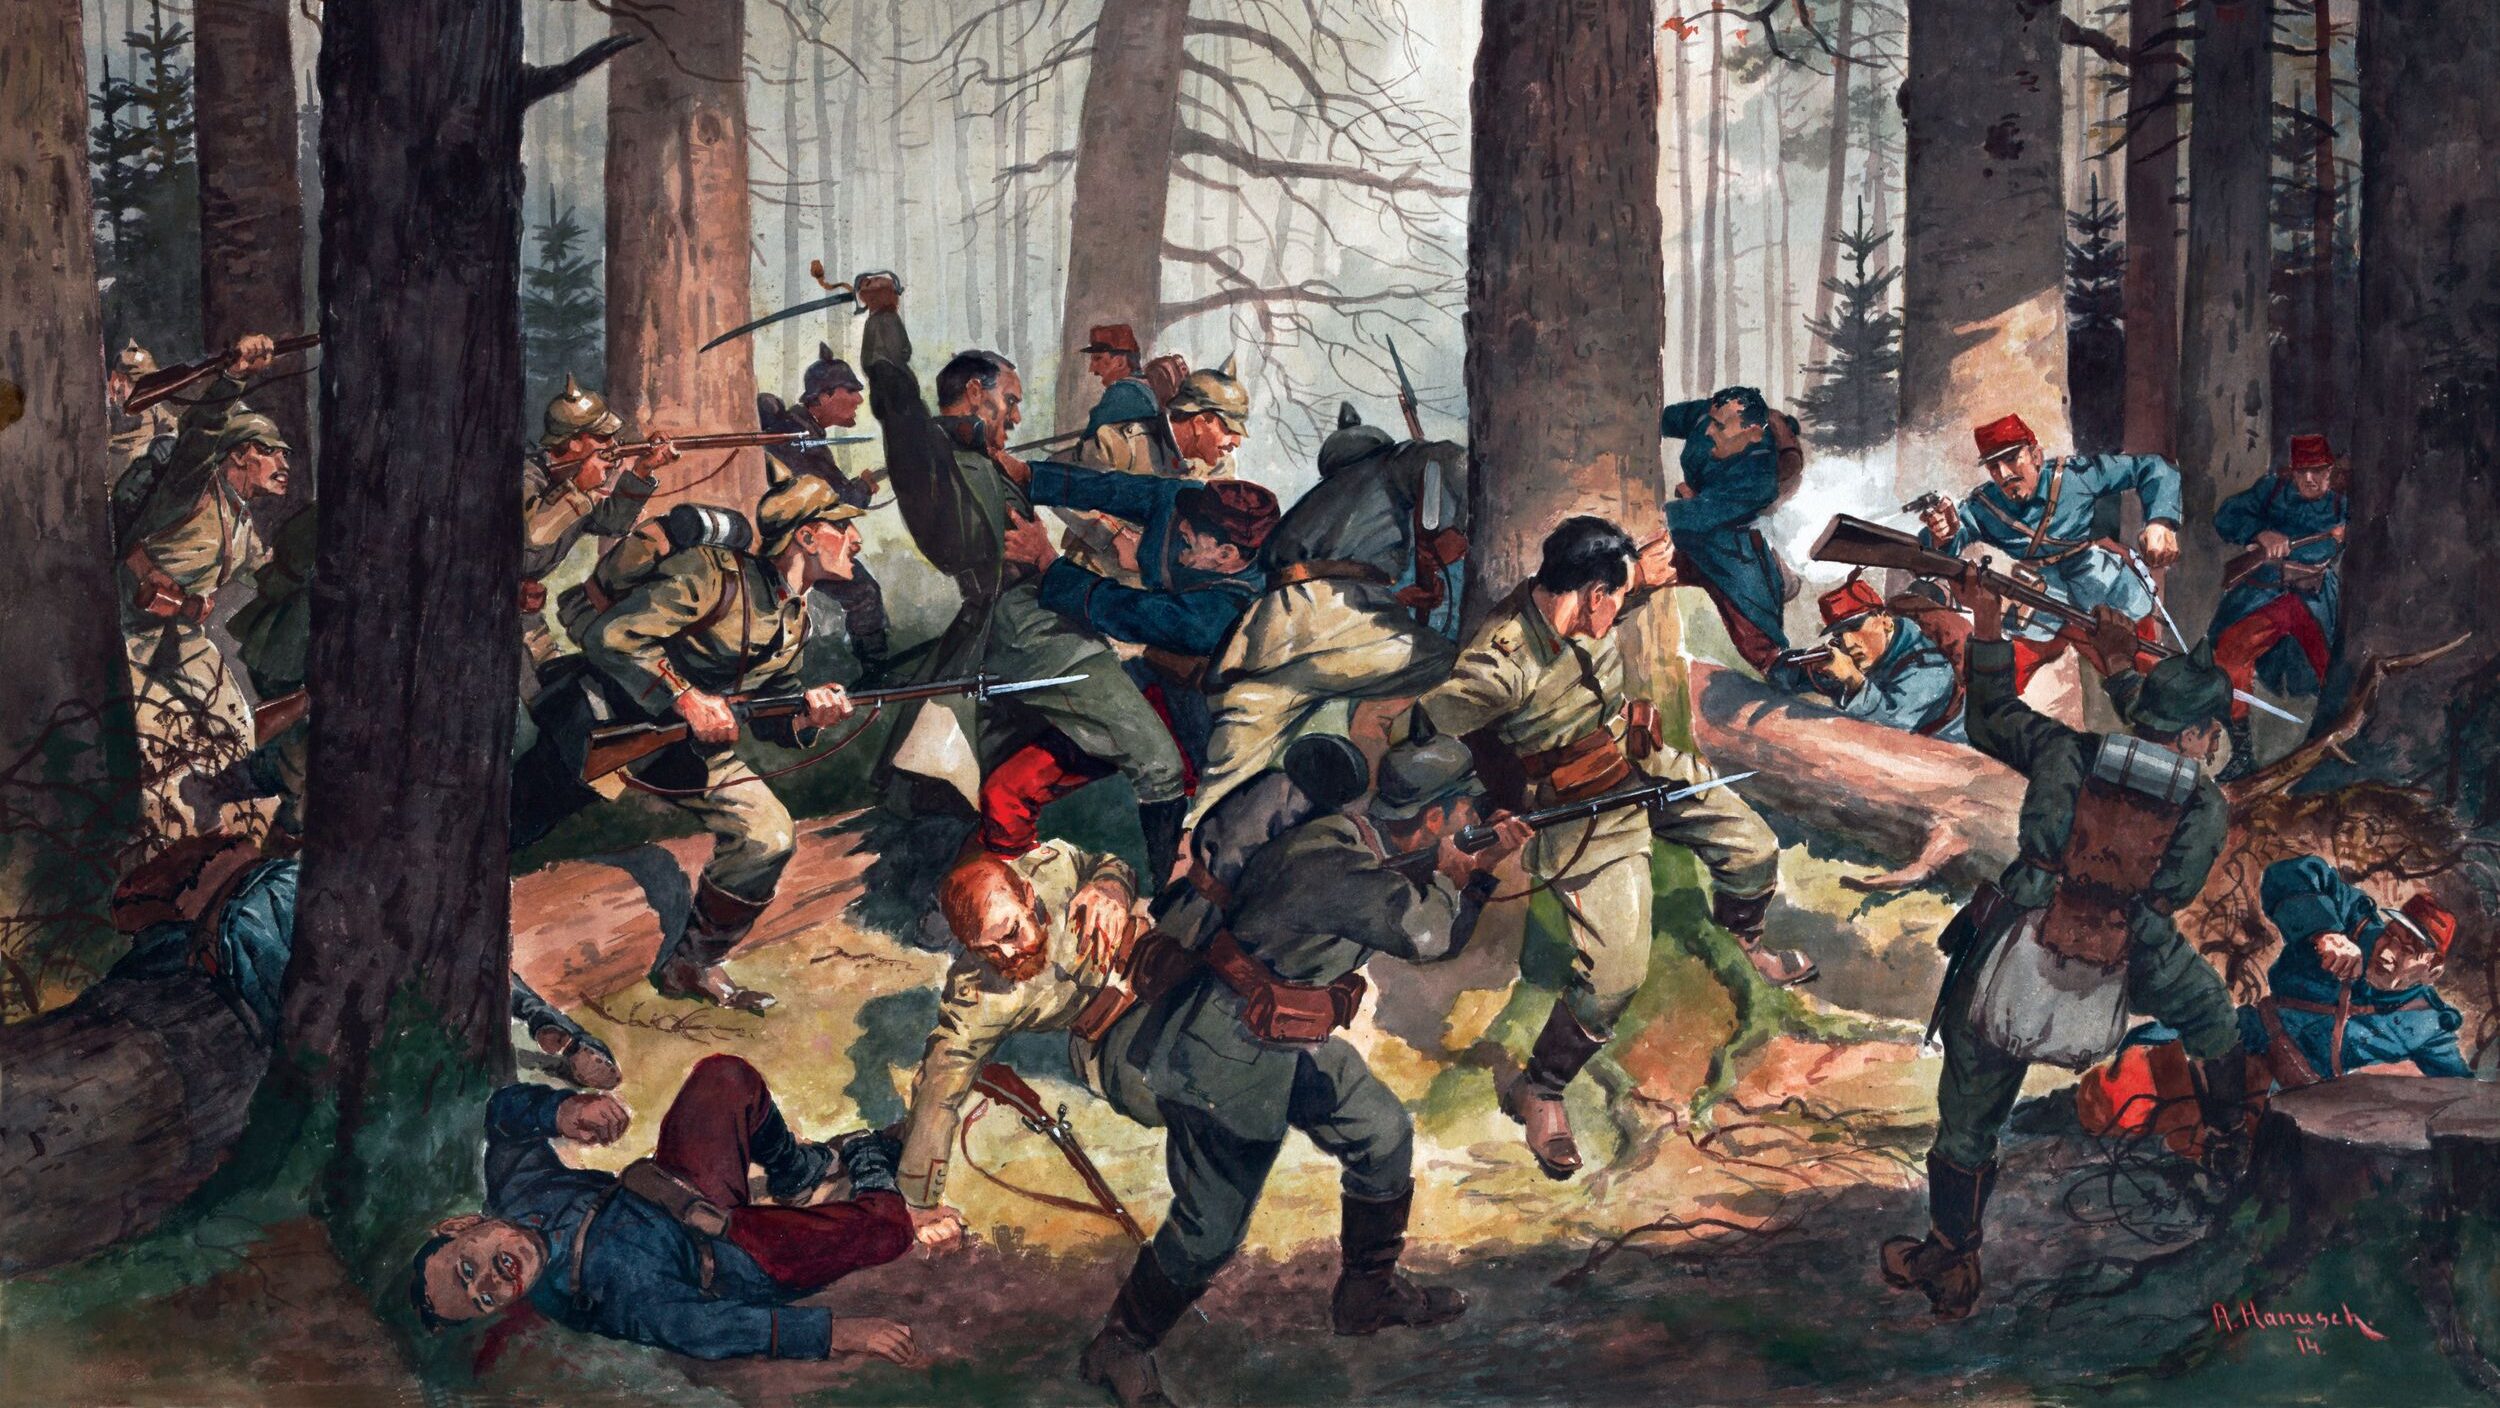 Germans in their pickelhaube leather helmets and French in red and blue uniforms engage in a brutal skirmish in a wooded section of World War I’s Western Front during the early months of the war.